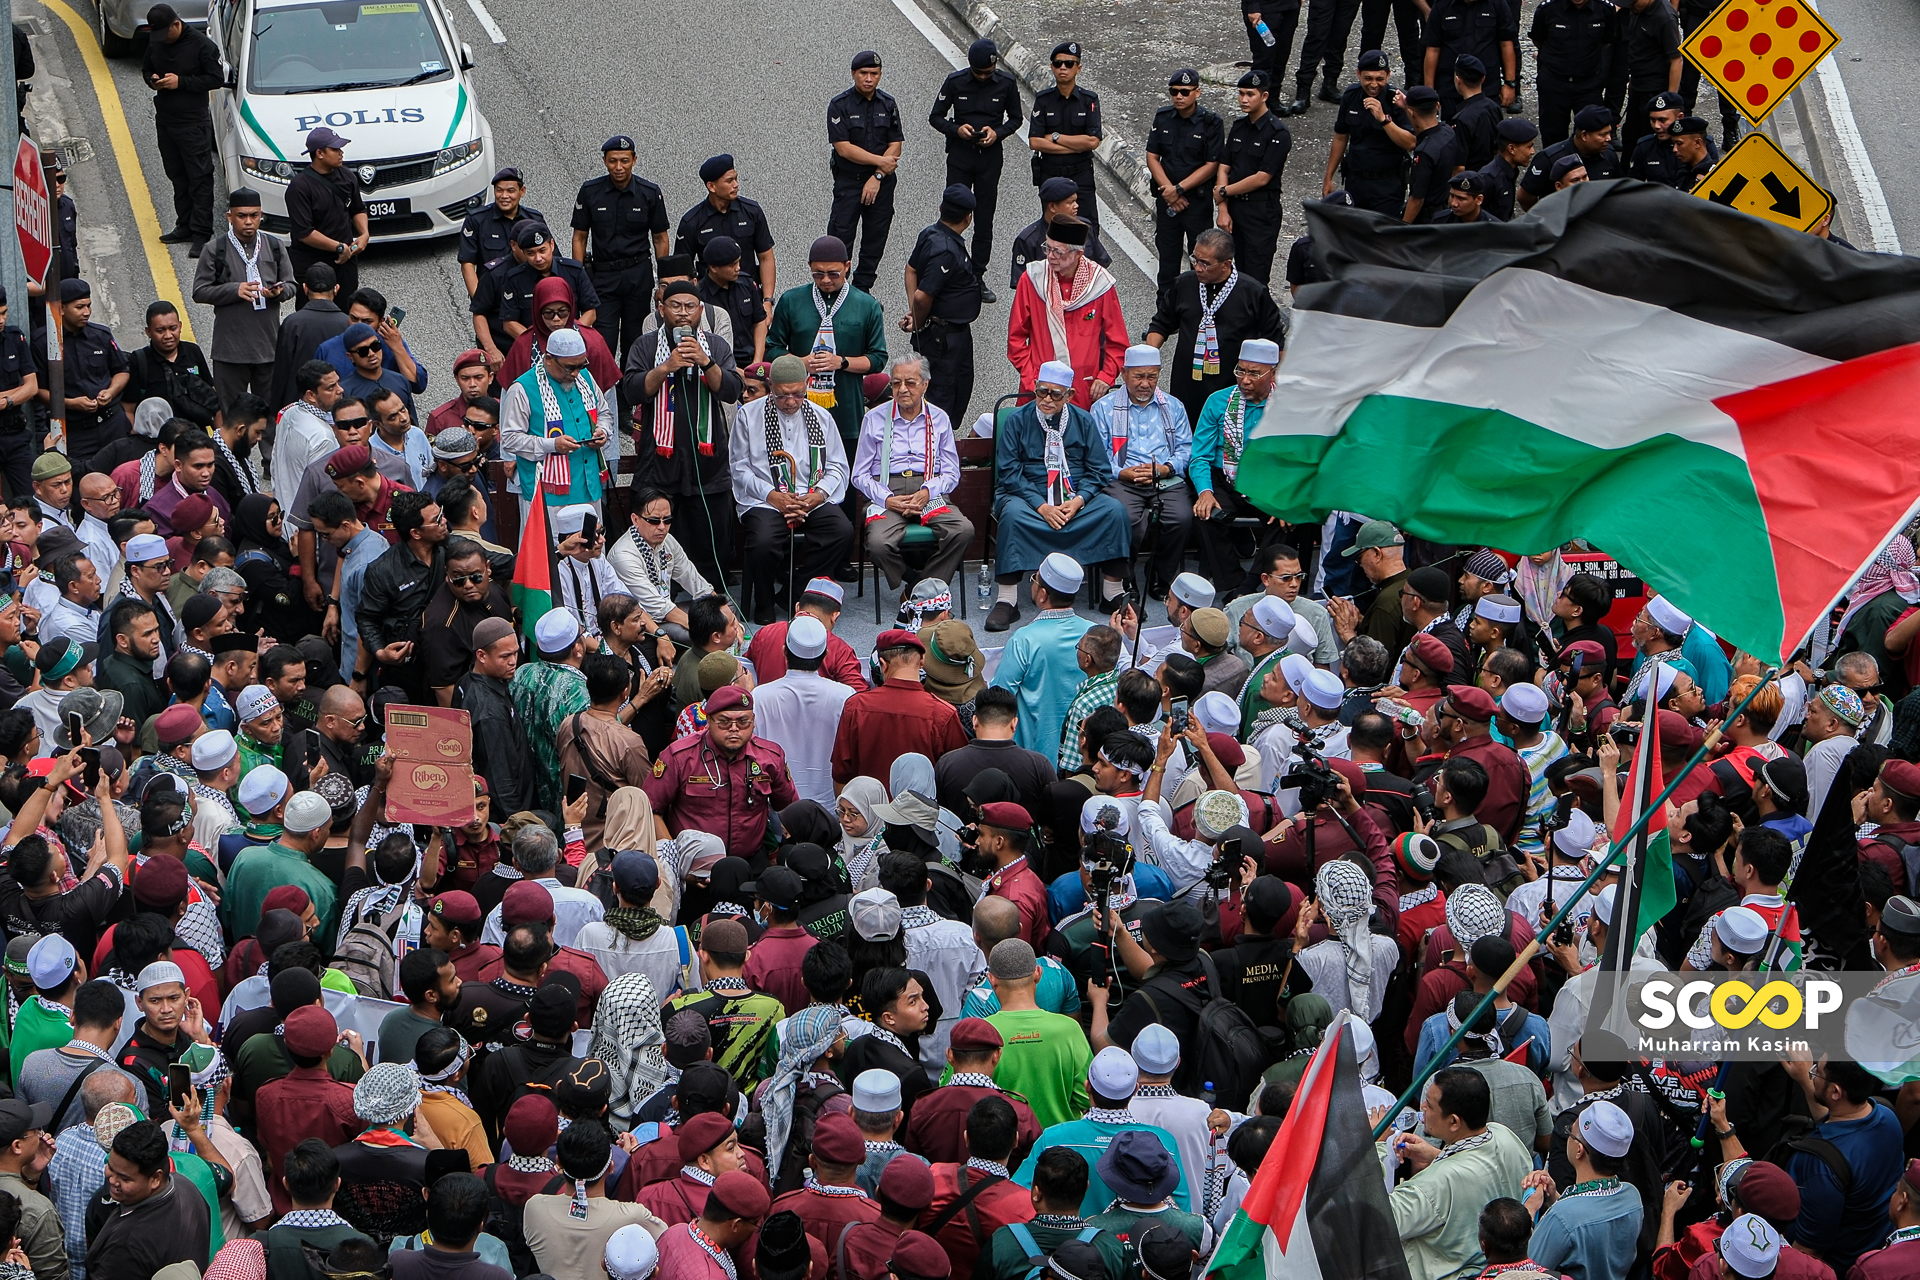 Dr Mahathir among thousands at pro-Palestine rally near US Embassy